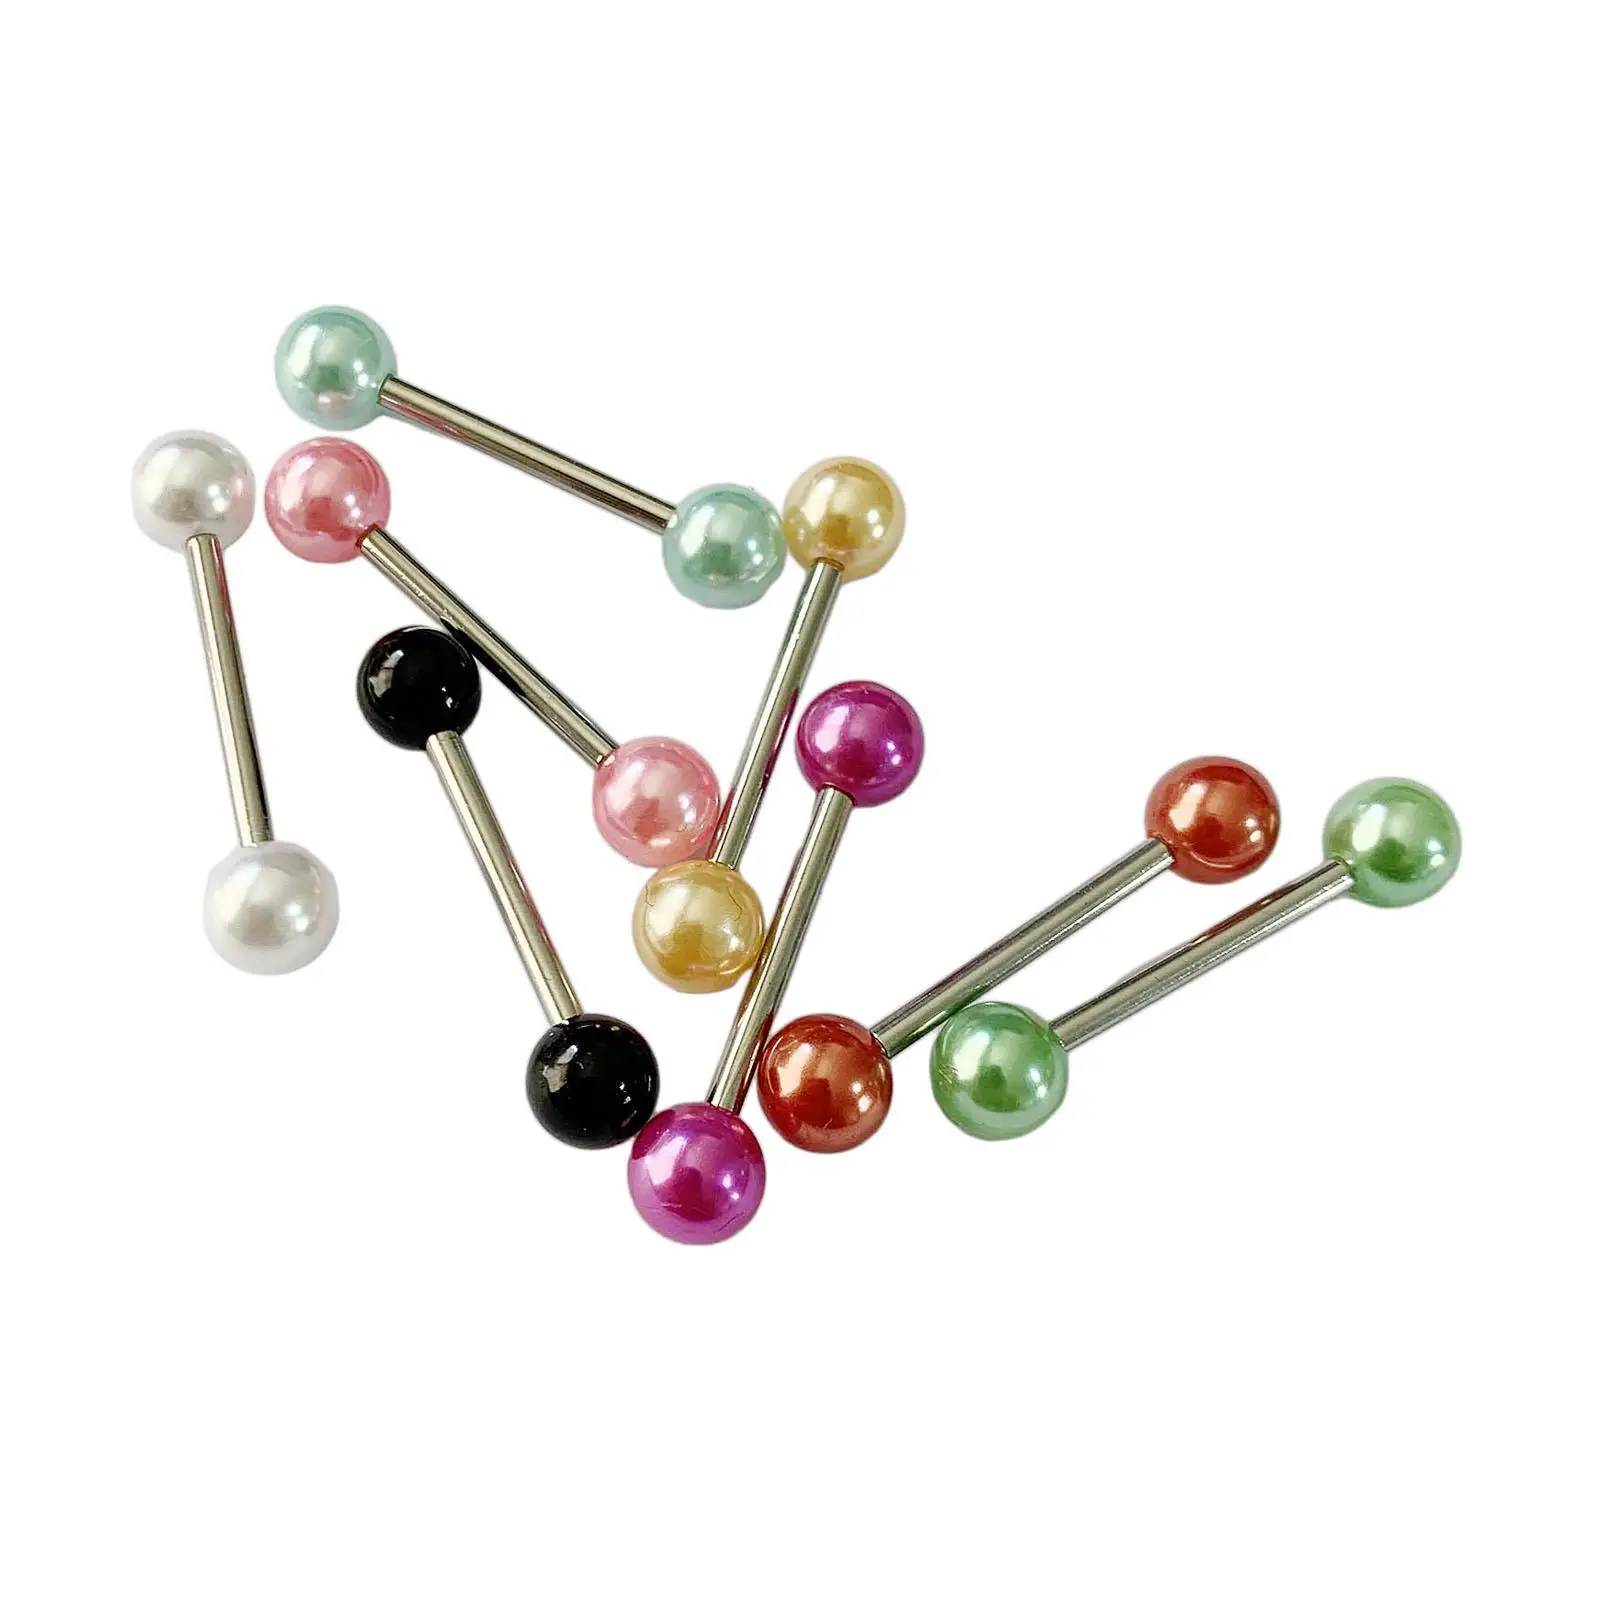 8 Pieces Tongue Rings Length 5/8